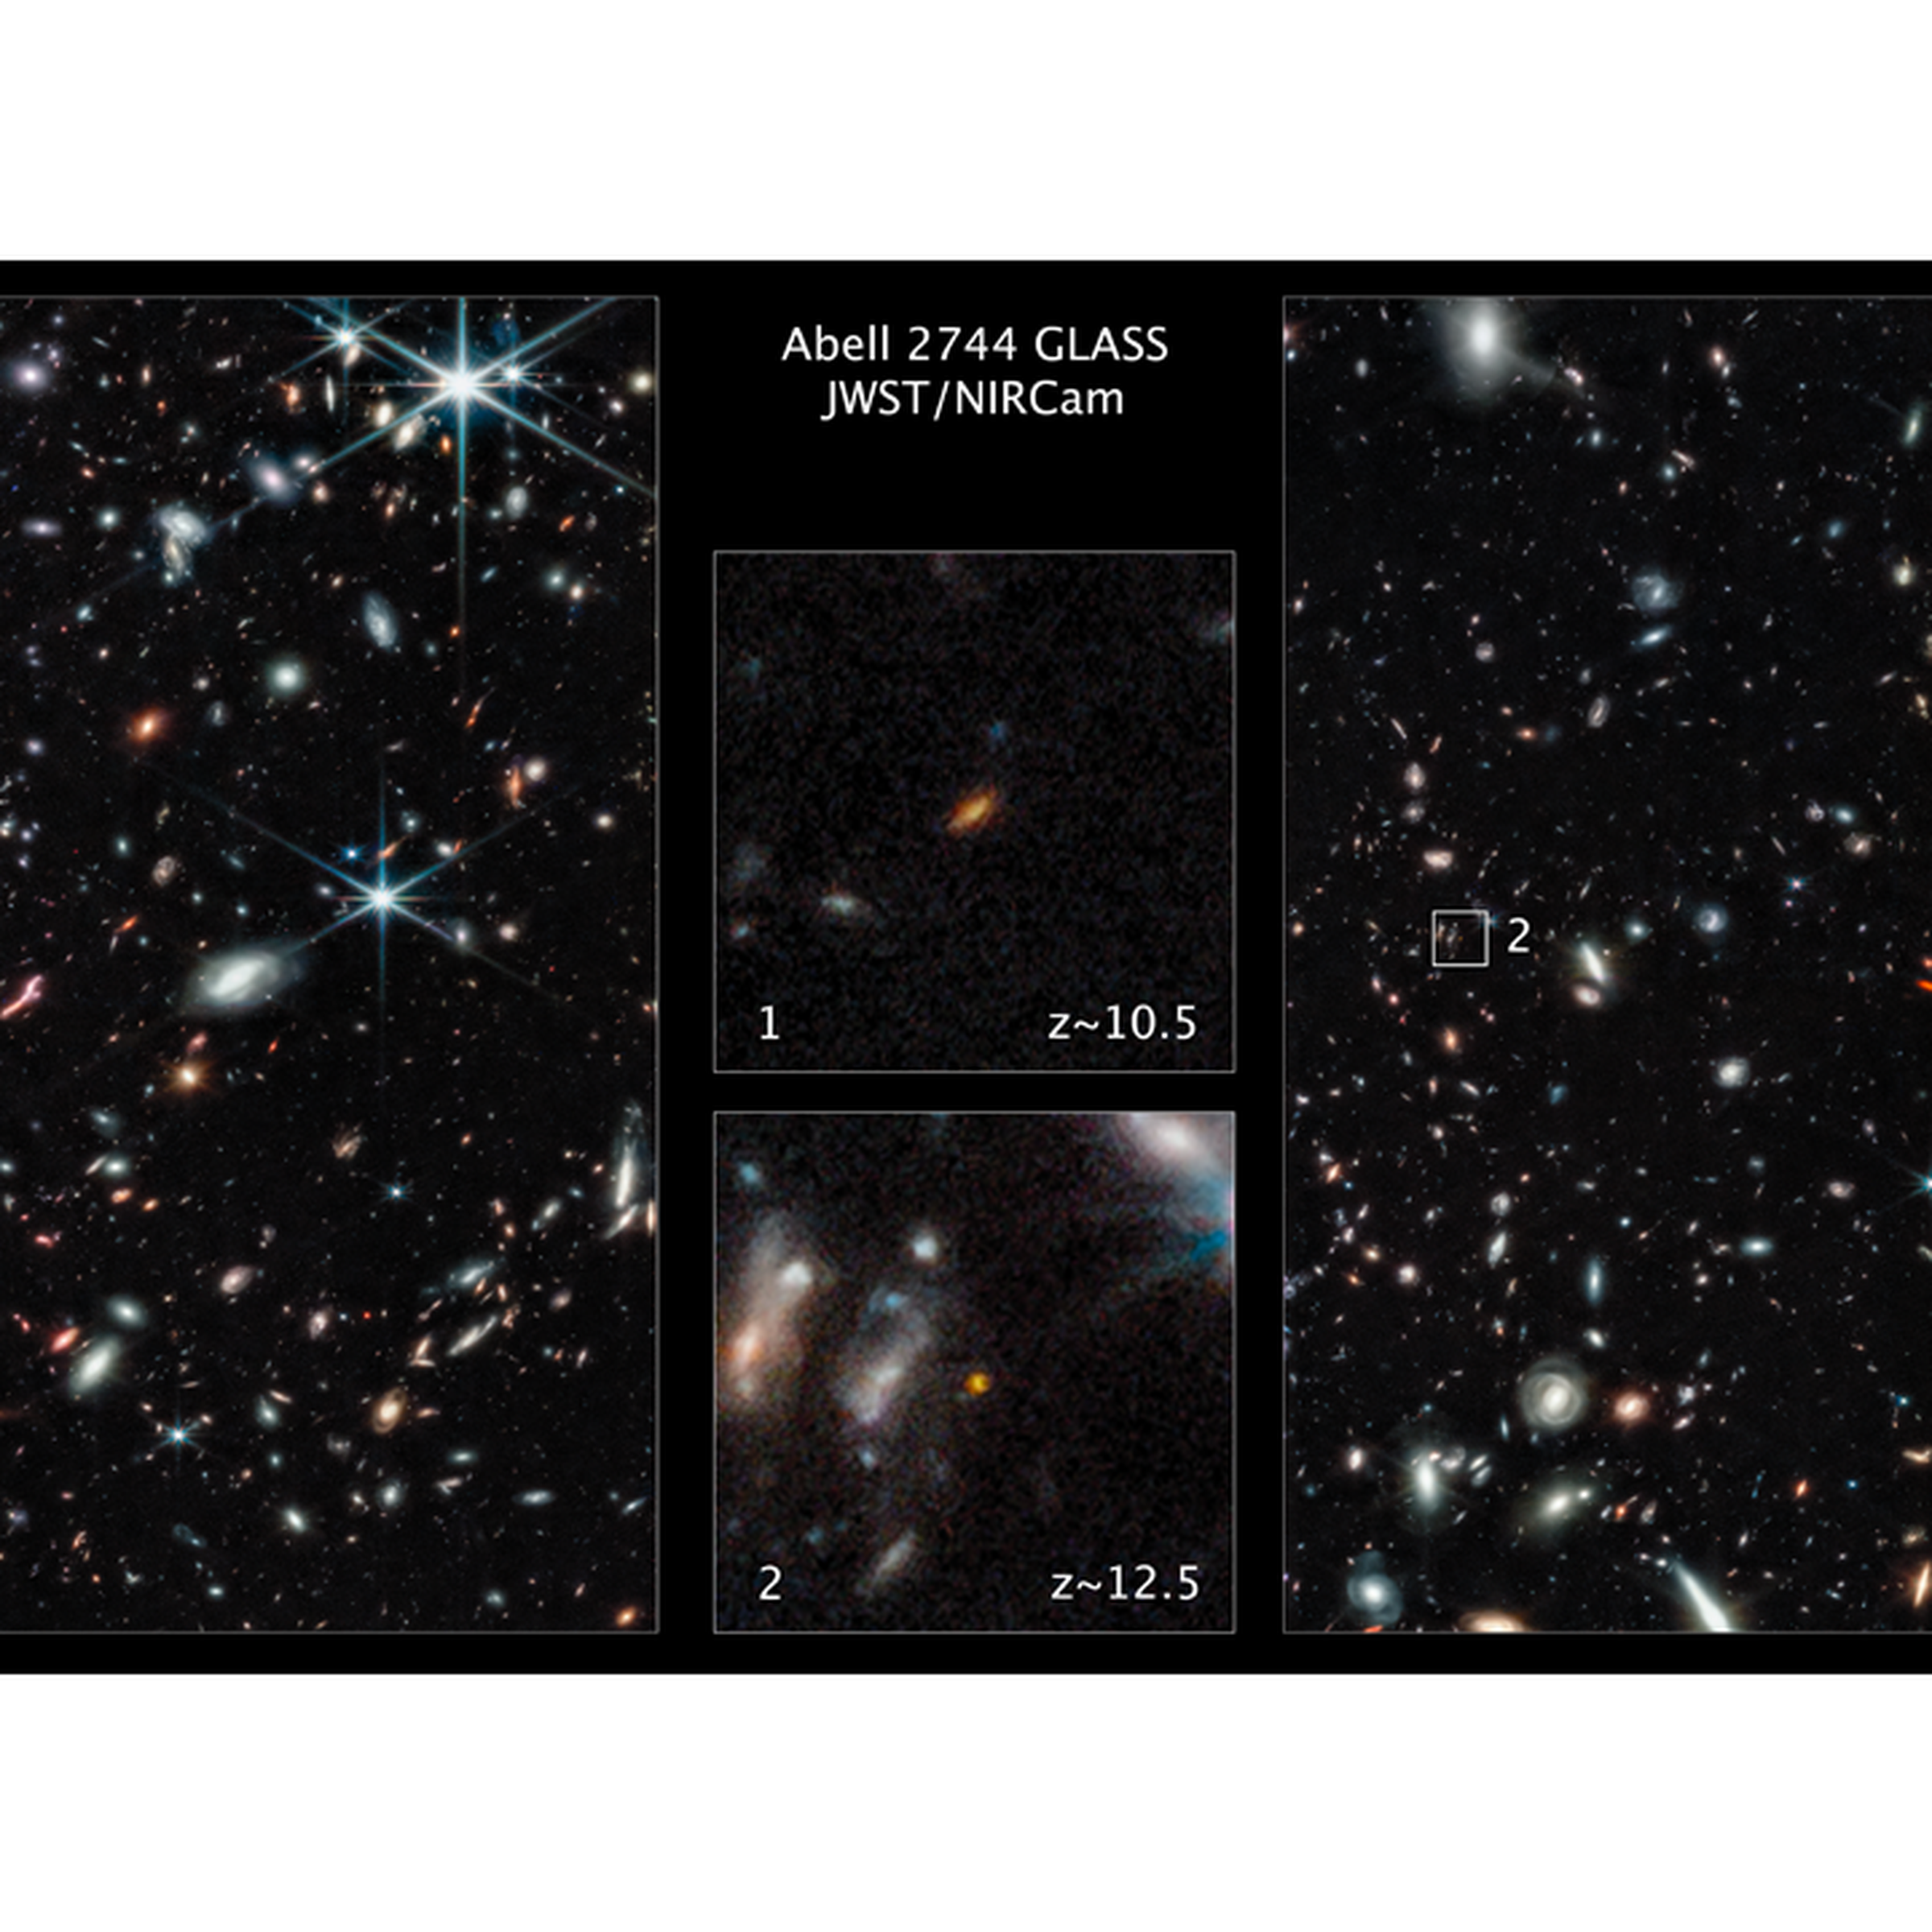 Pictures of distant galaxies taken by JWST 